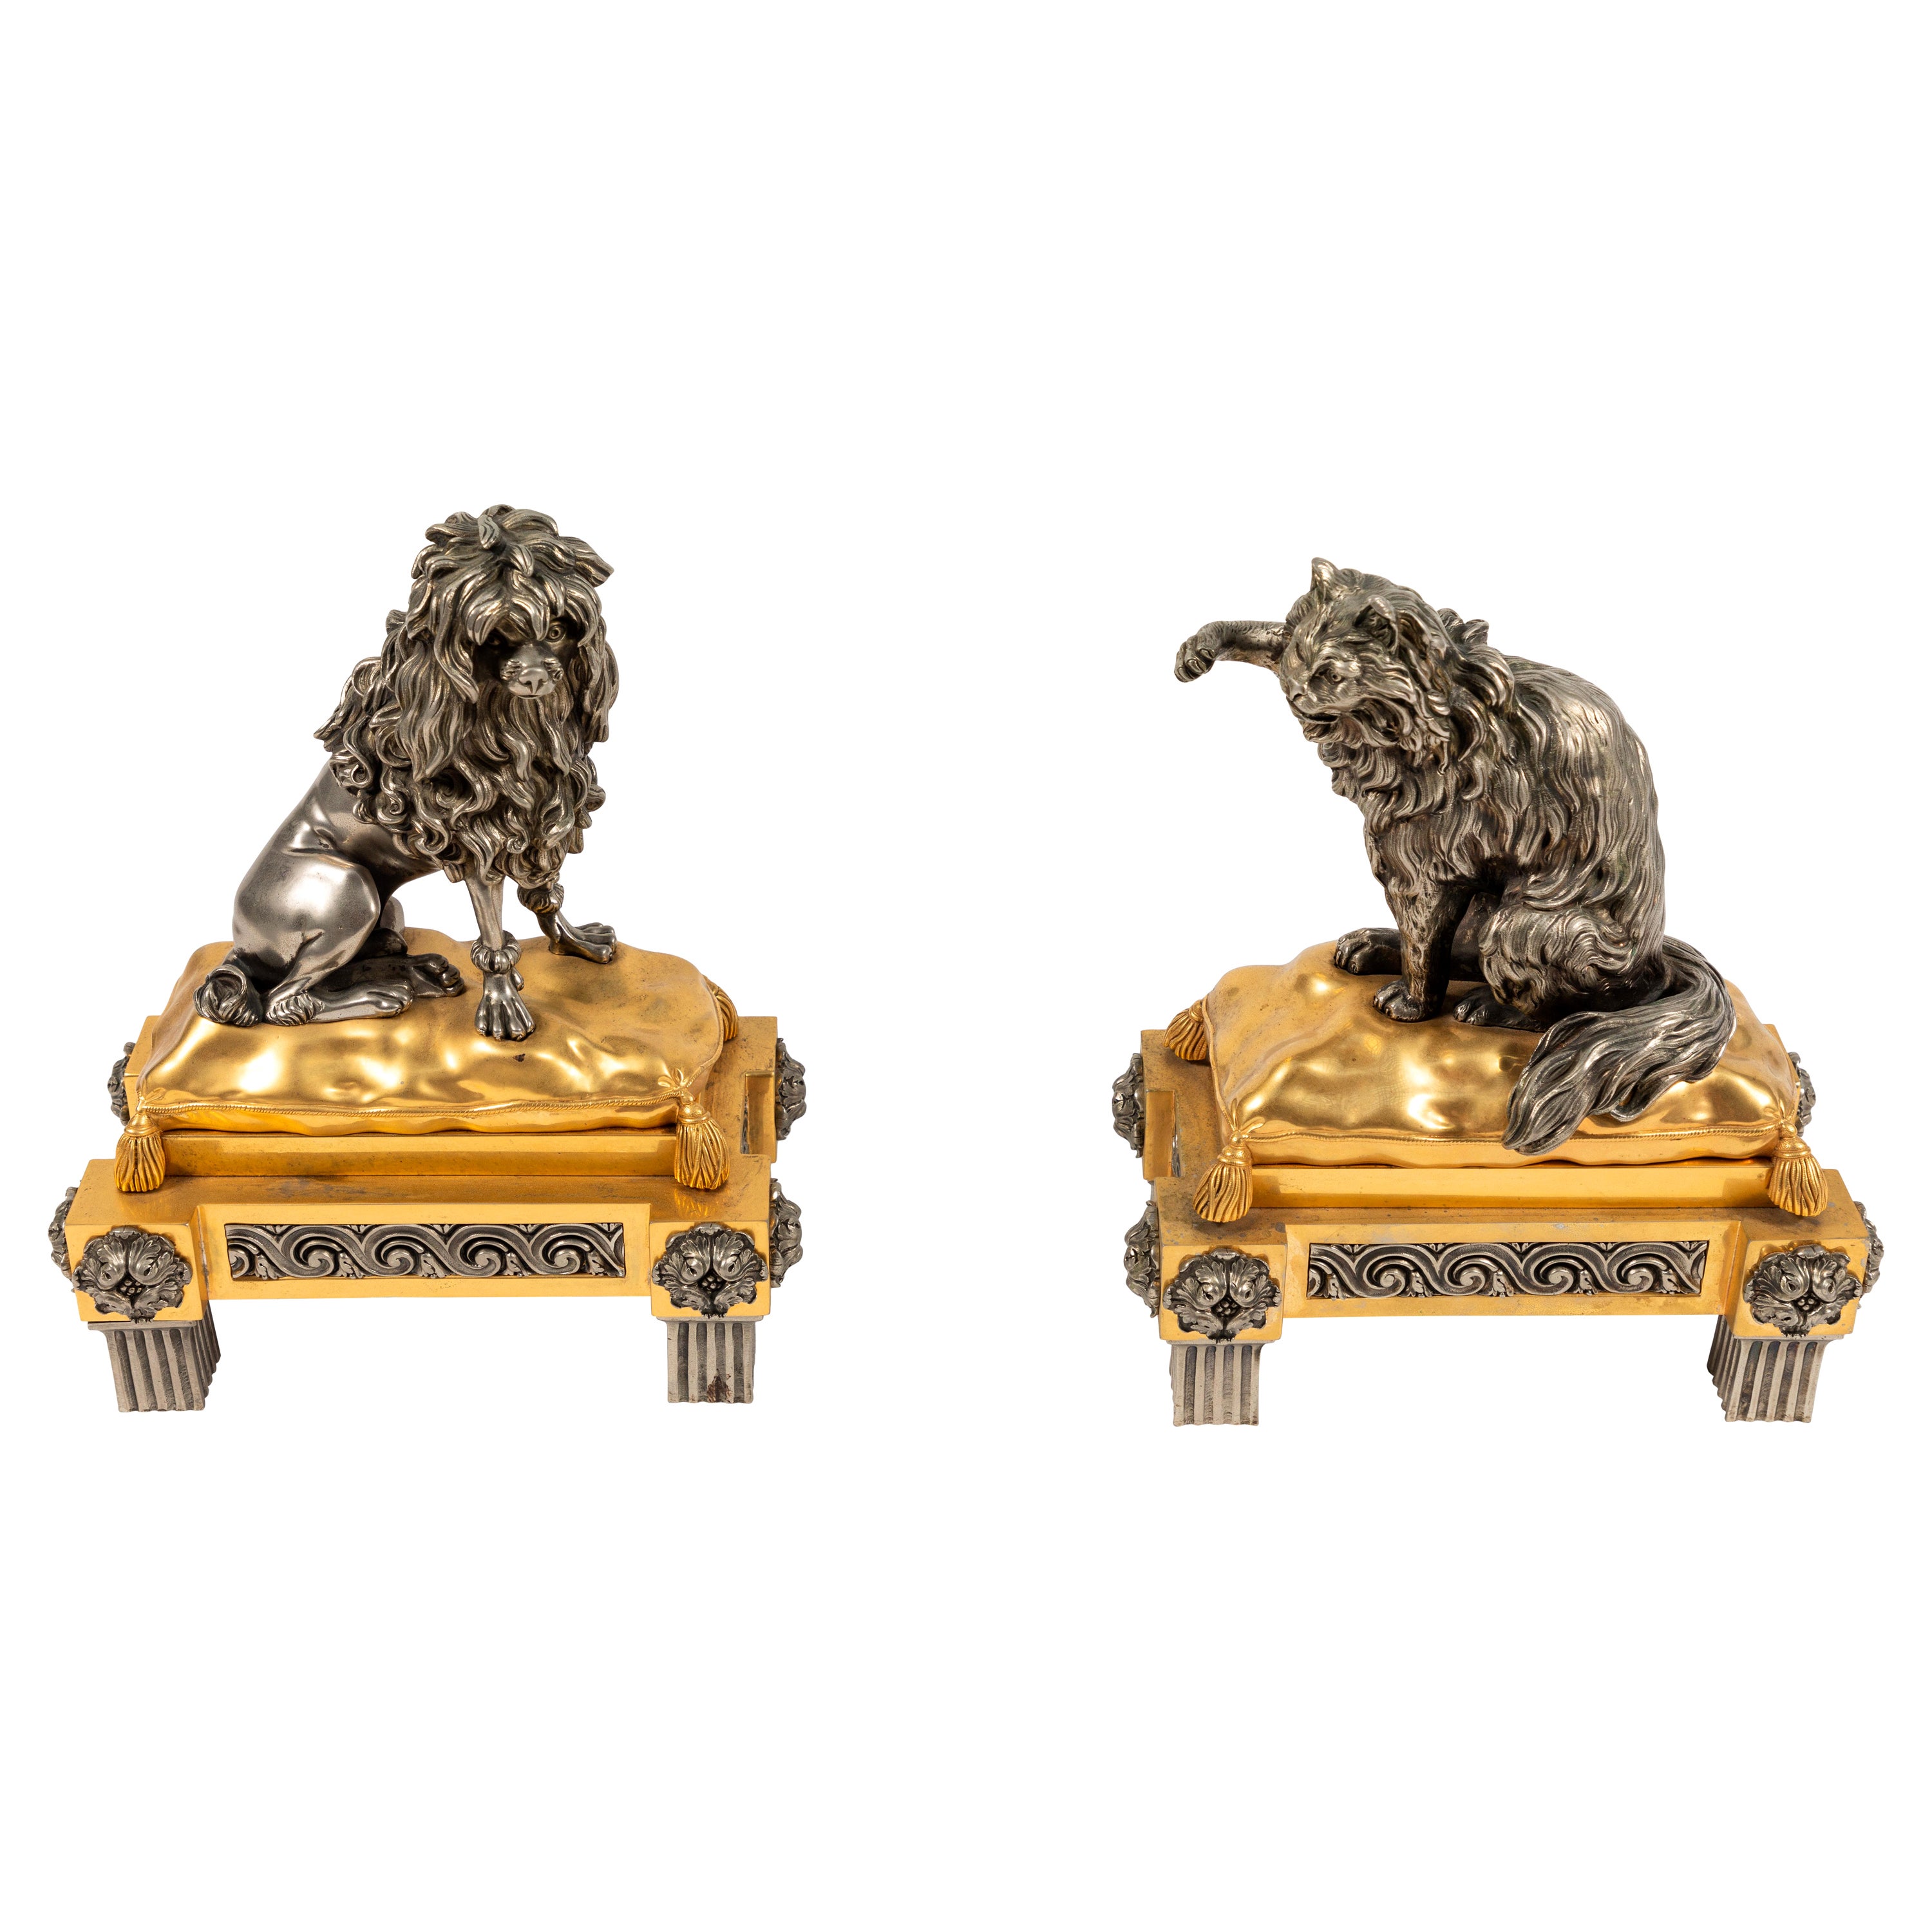 19th Century French Bronze Animal Sculptures For Sale at 1stDibs